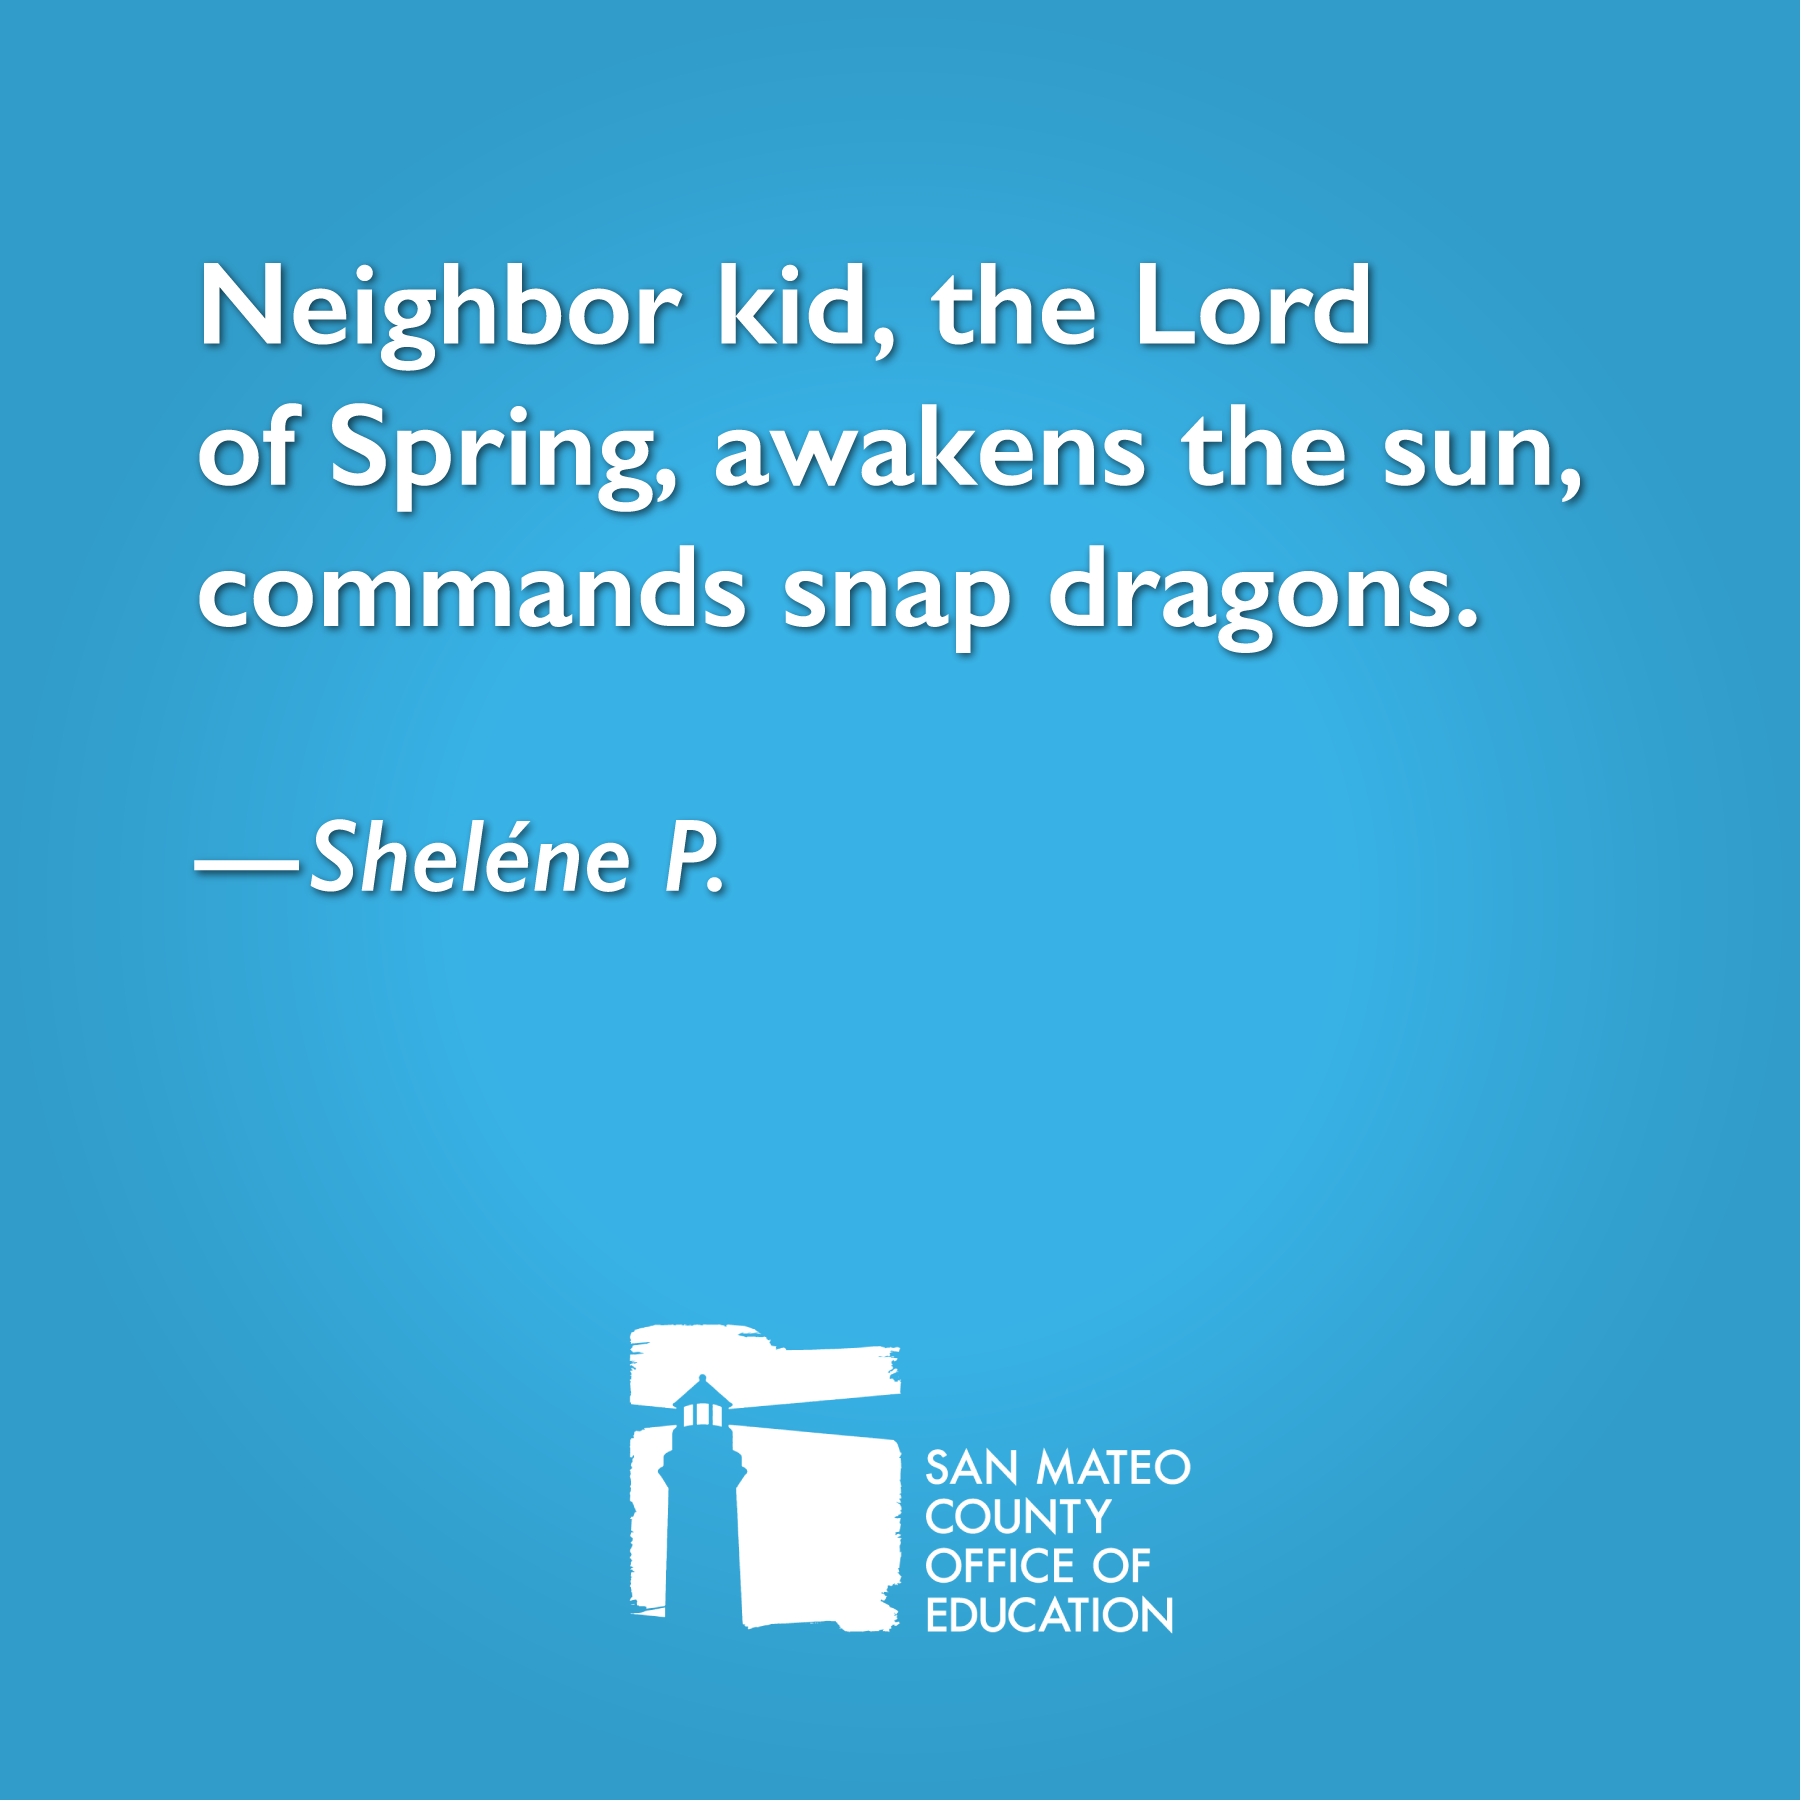 Neighbor kid, the Lord of Spring, awakens the sun, commands snap dragons. Written by Sheléne P.